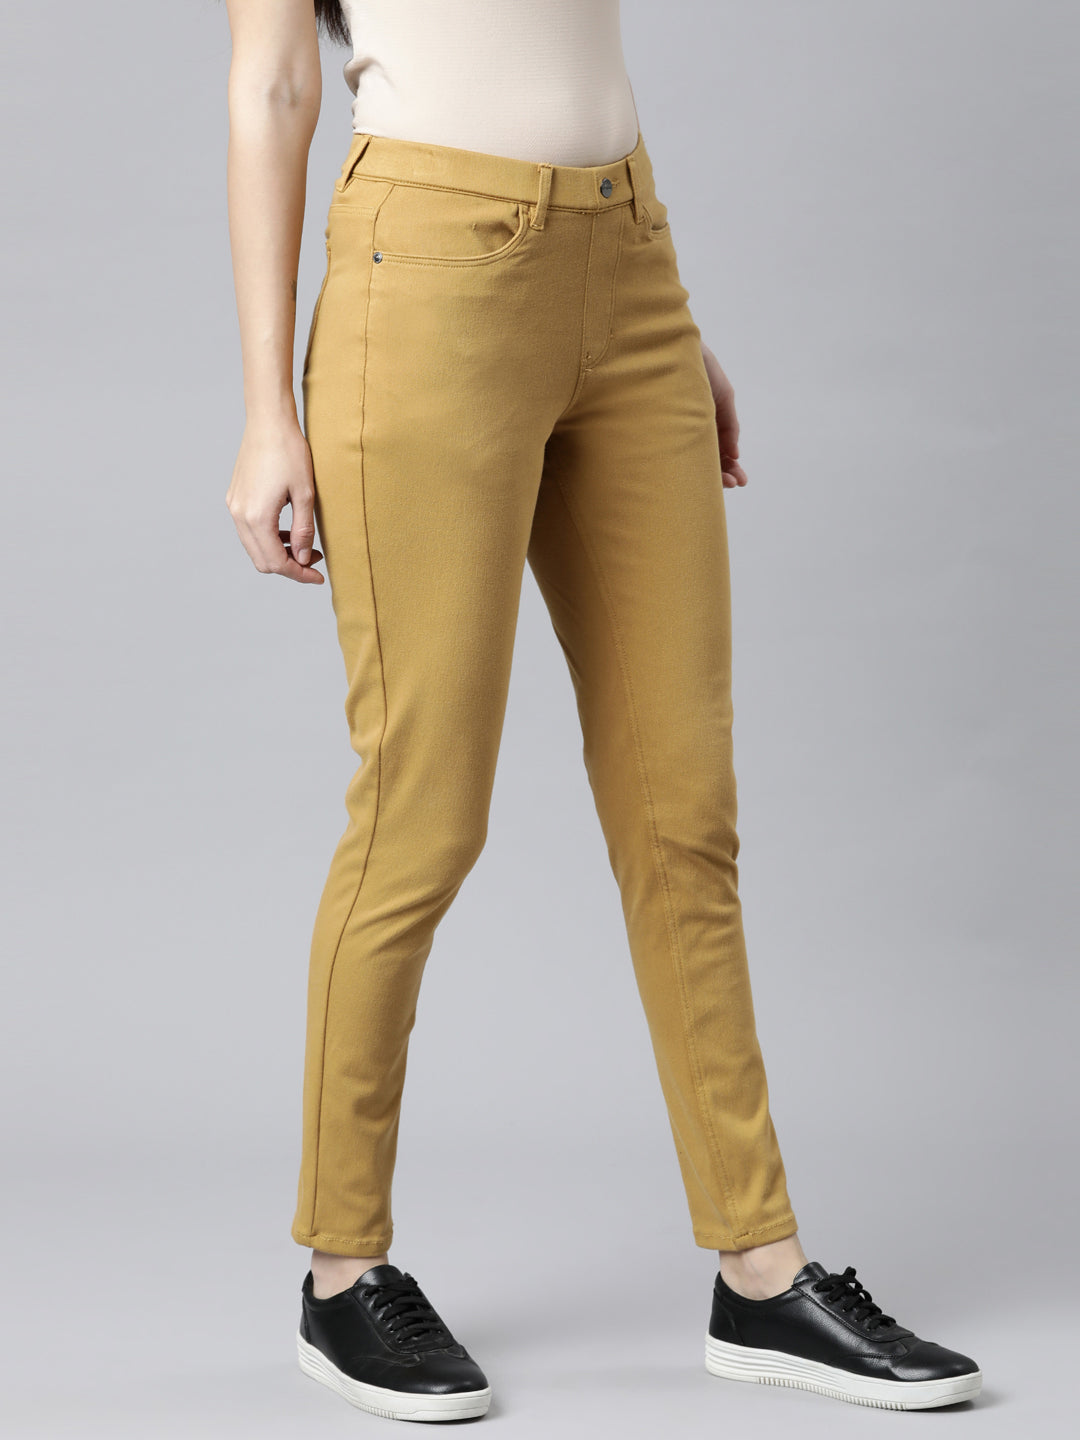 Jeans & Trousers | New sandal colour jean | Freeup